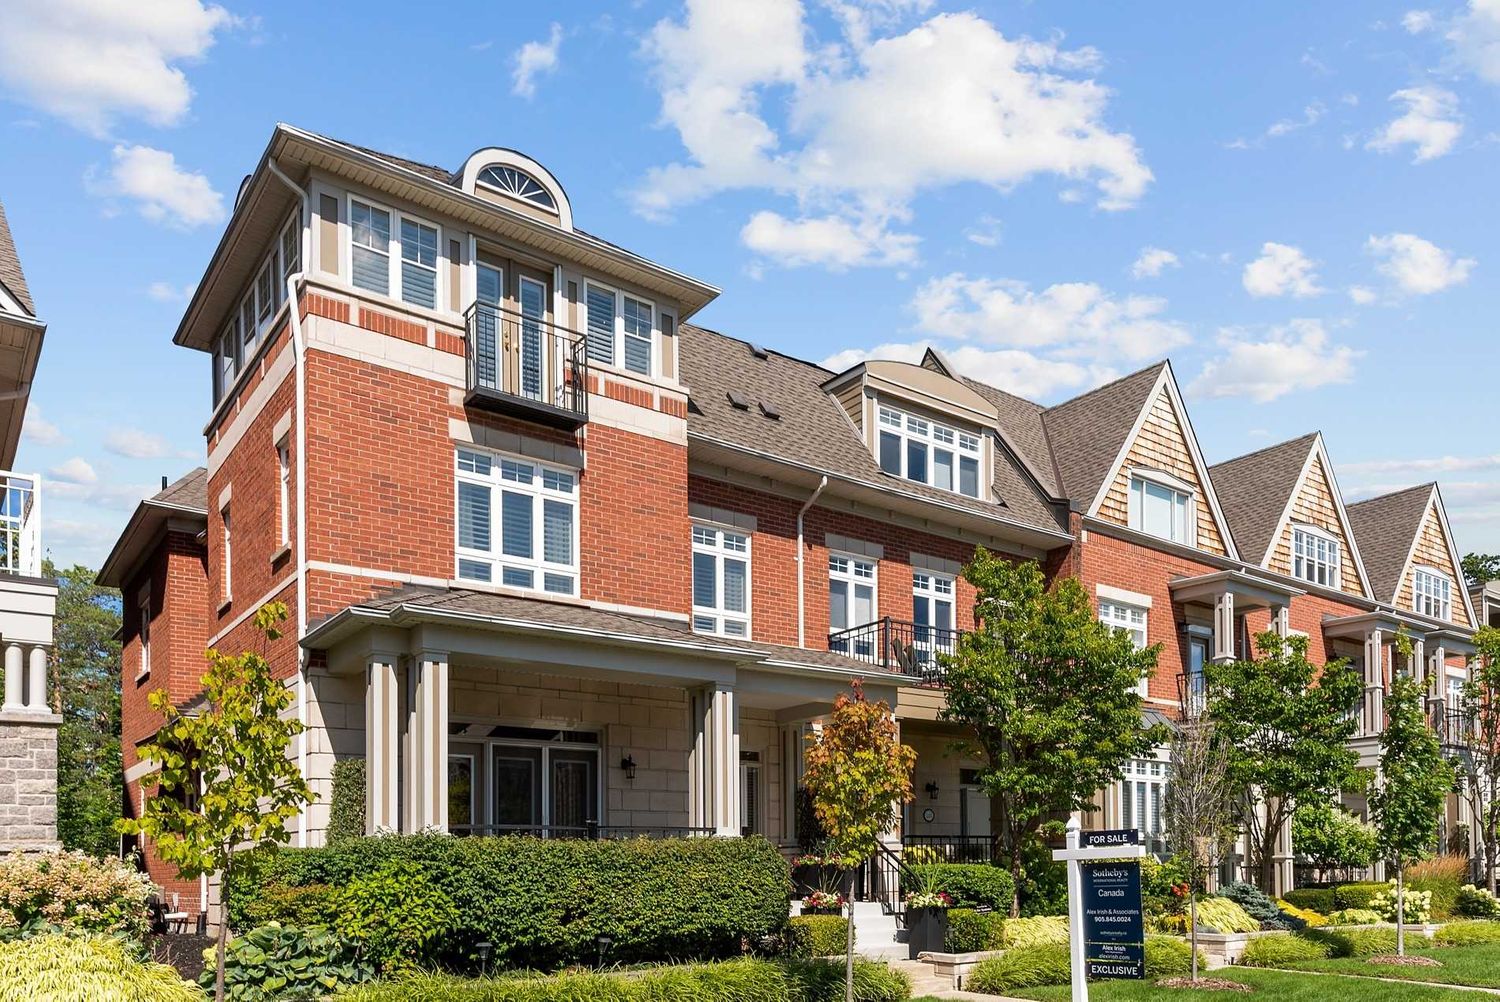 97-159 St Lawrence Drive. St Lawrence Drive Townhomes is located in  Mississauga, Toronto - image #1 of 2